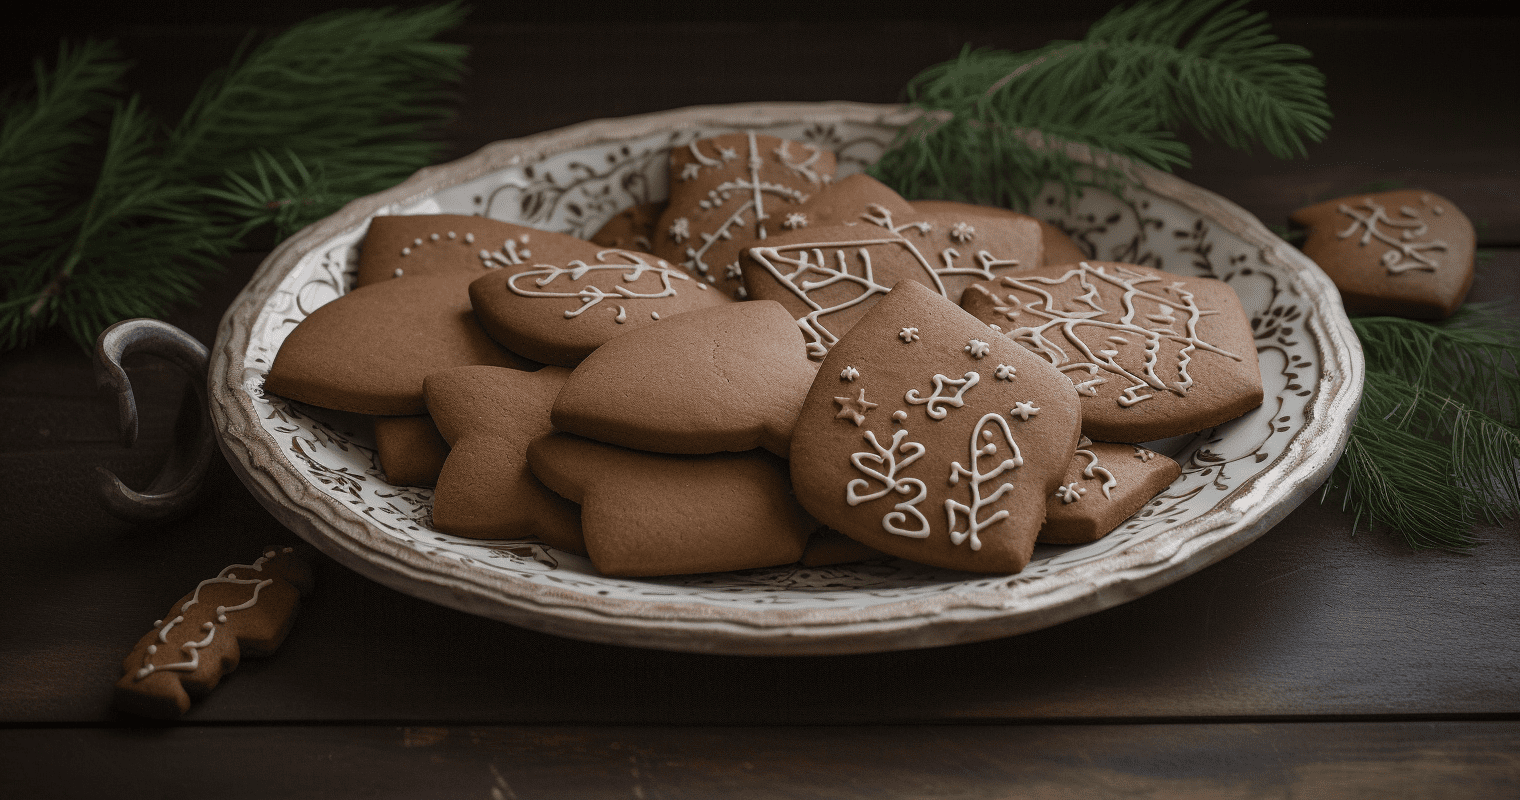 Memories and Traditions: A Guide to Making Gingerbread Cookies